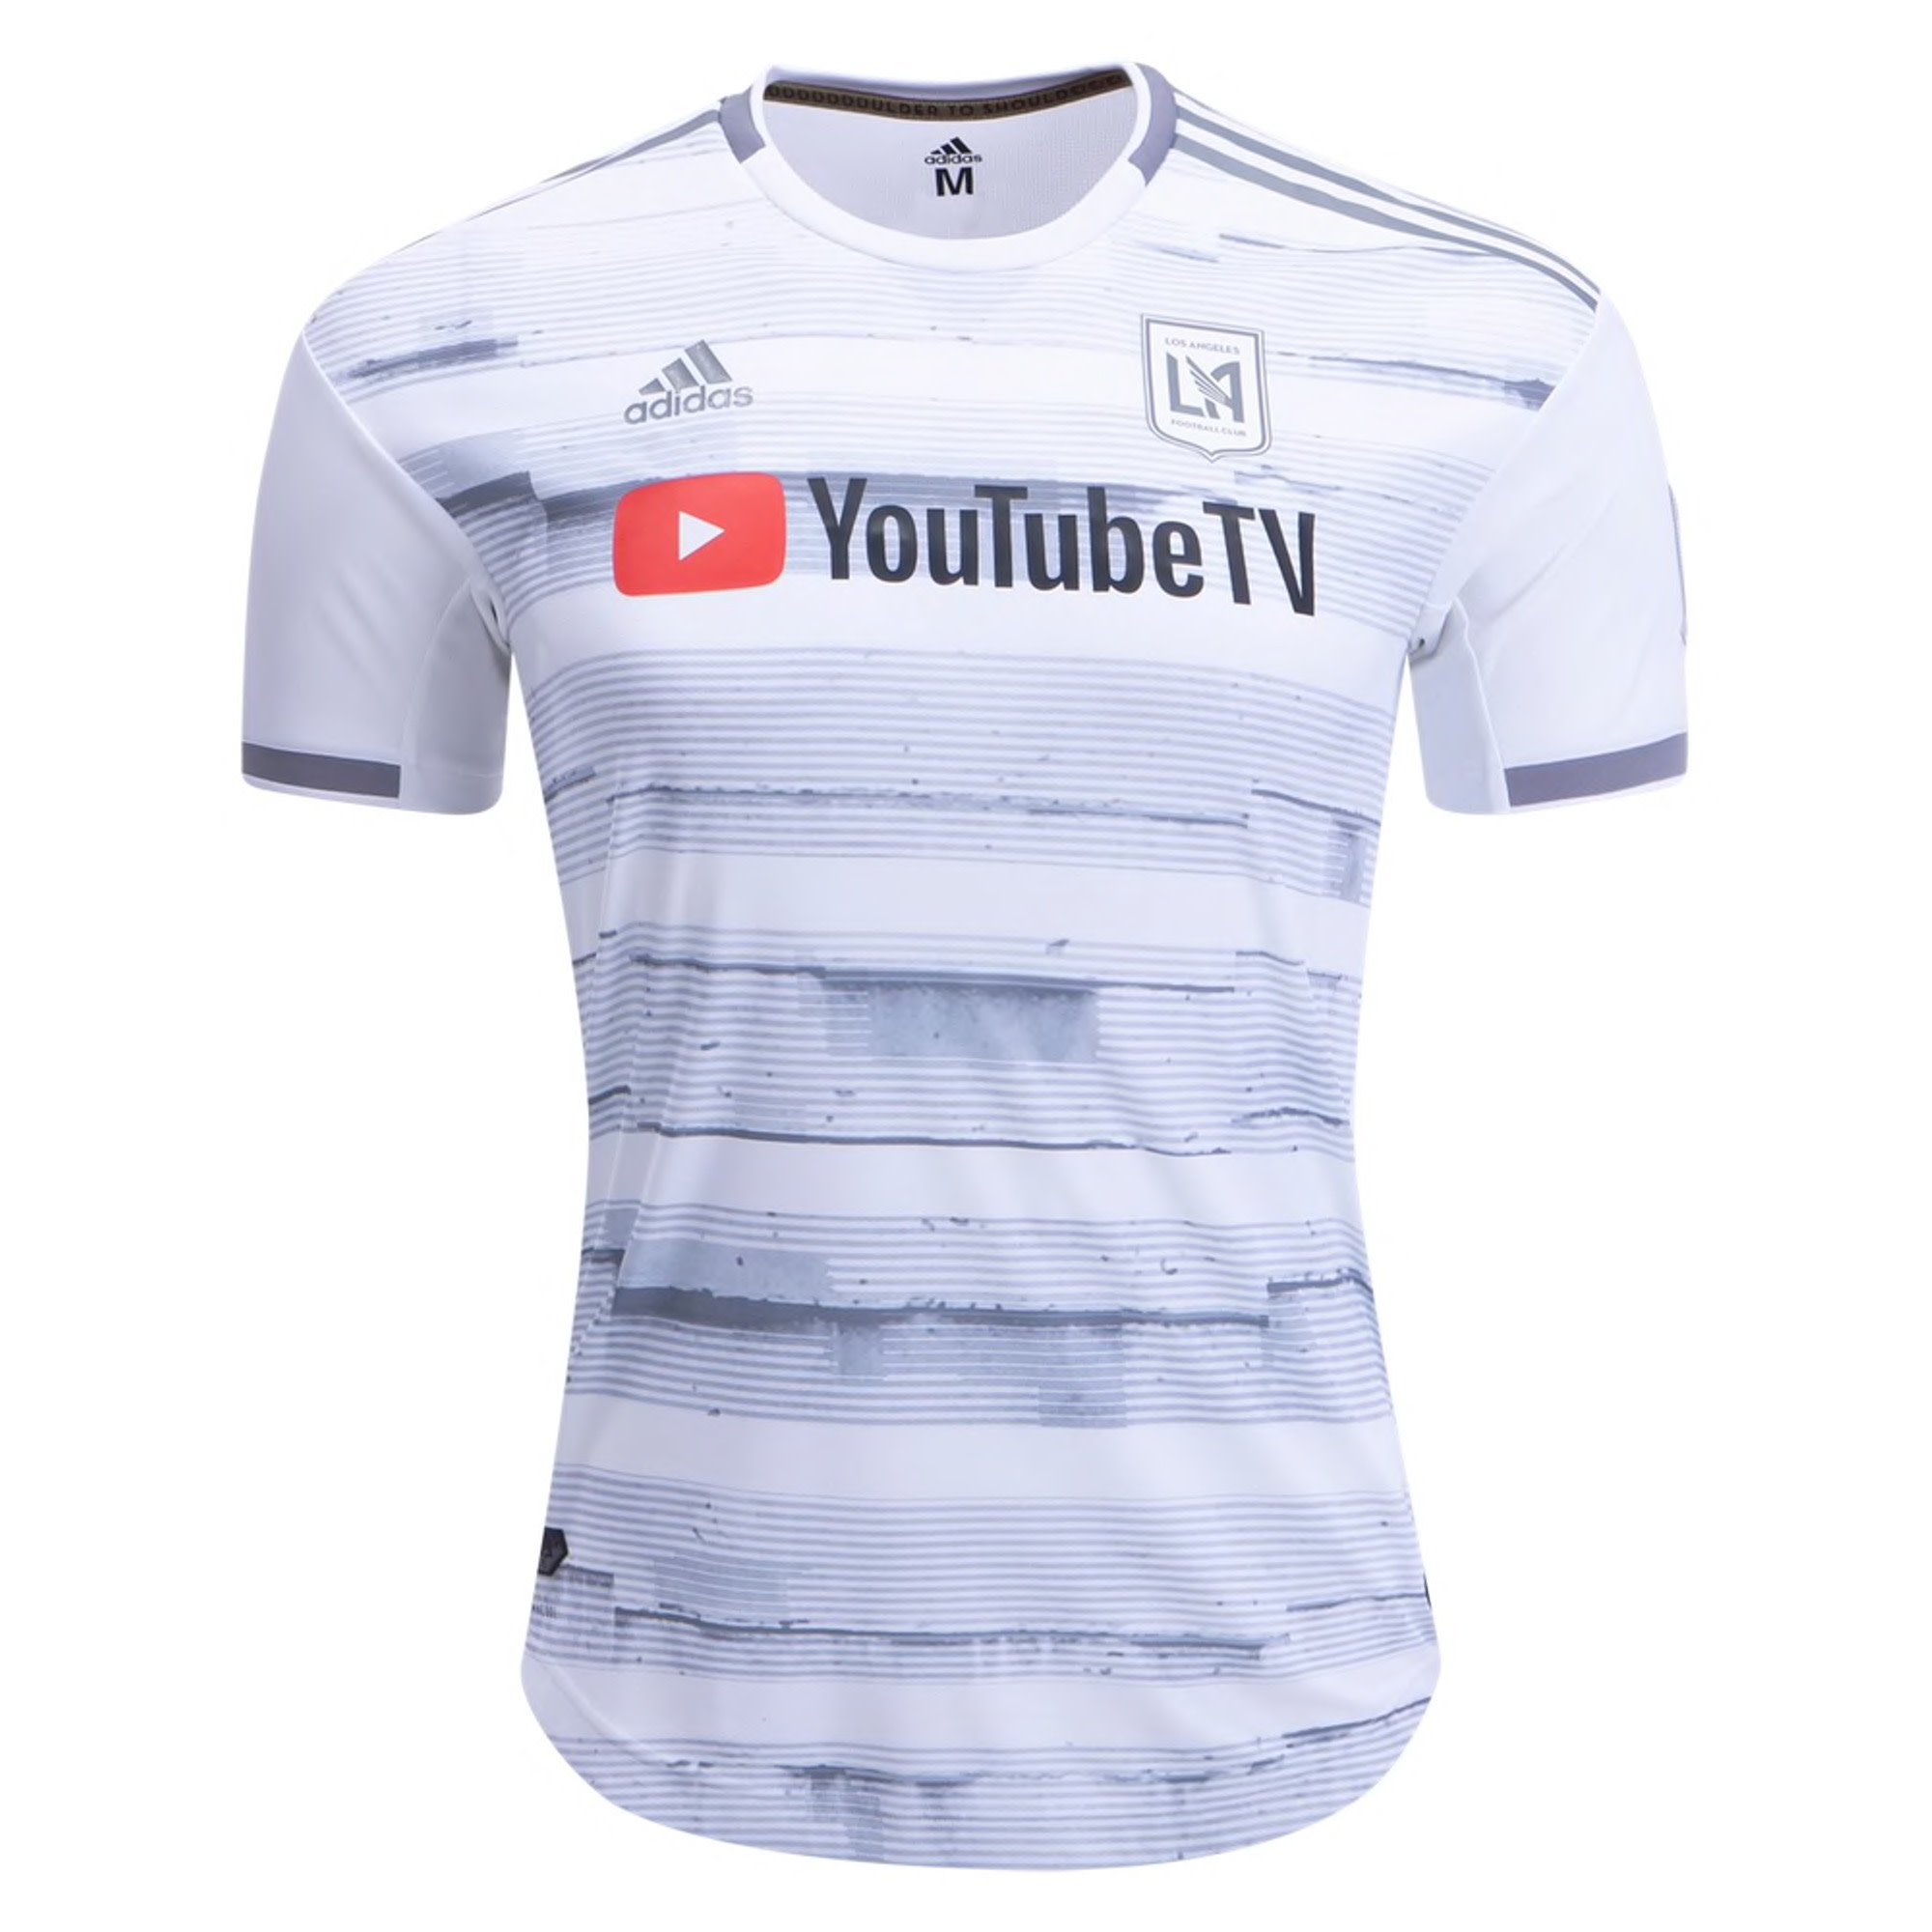 LAFC M Adidas '20 Authentic Away Jersey White - The Locker Room of